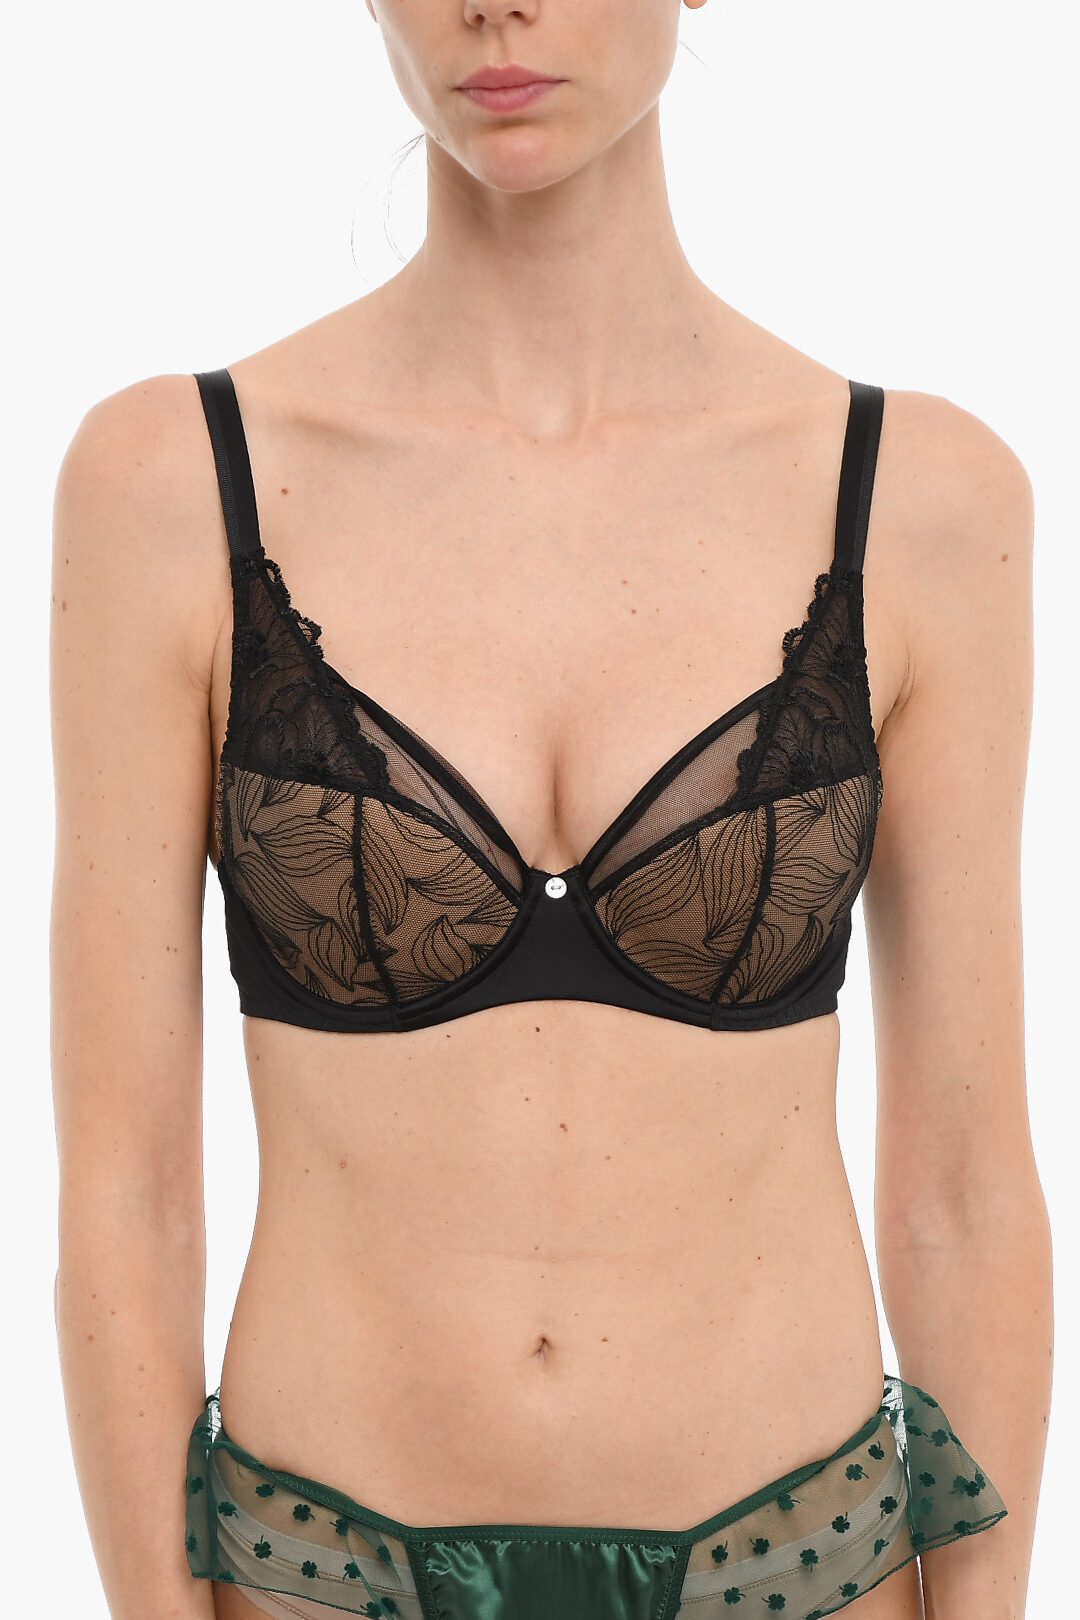 https://data.glamood.com/imgprodotto/semi-padded-flora-balconette-bra-with-floral-embroidery_1366507_zoom.jpg